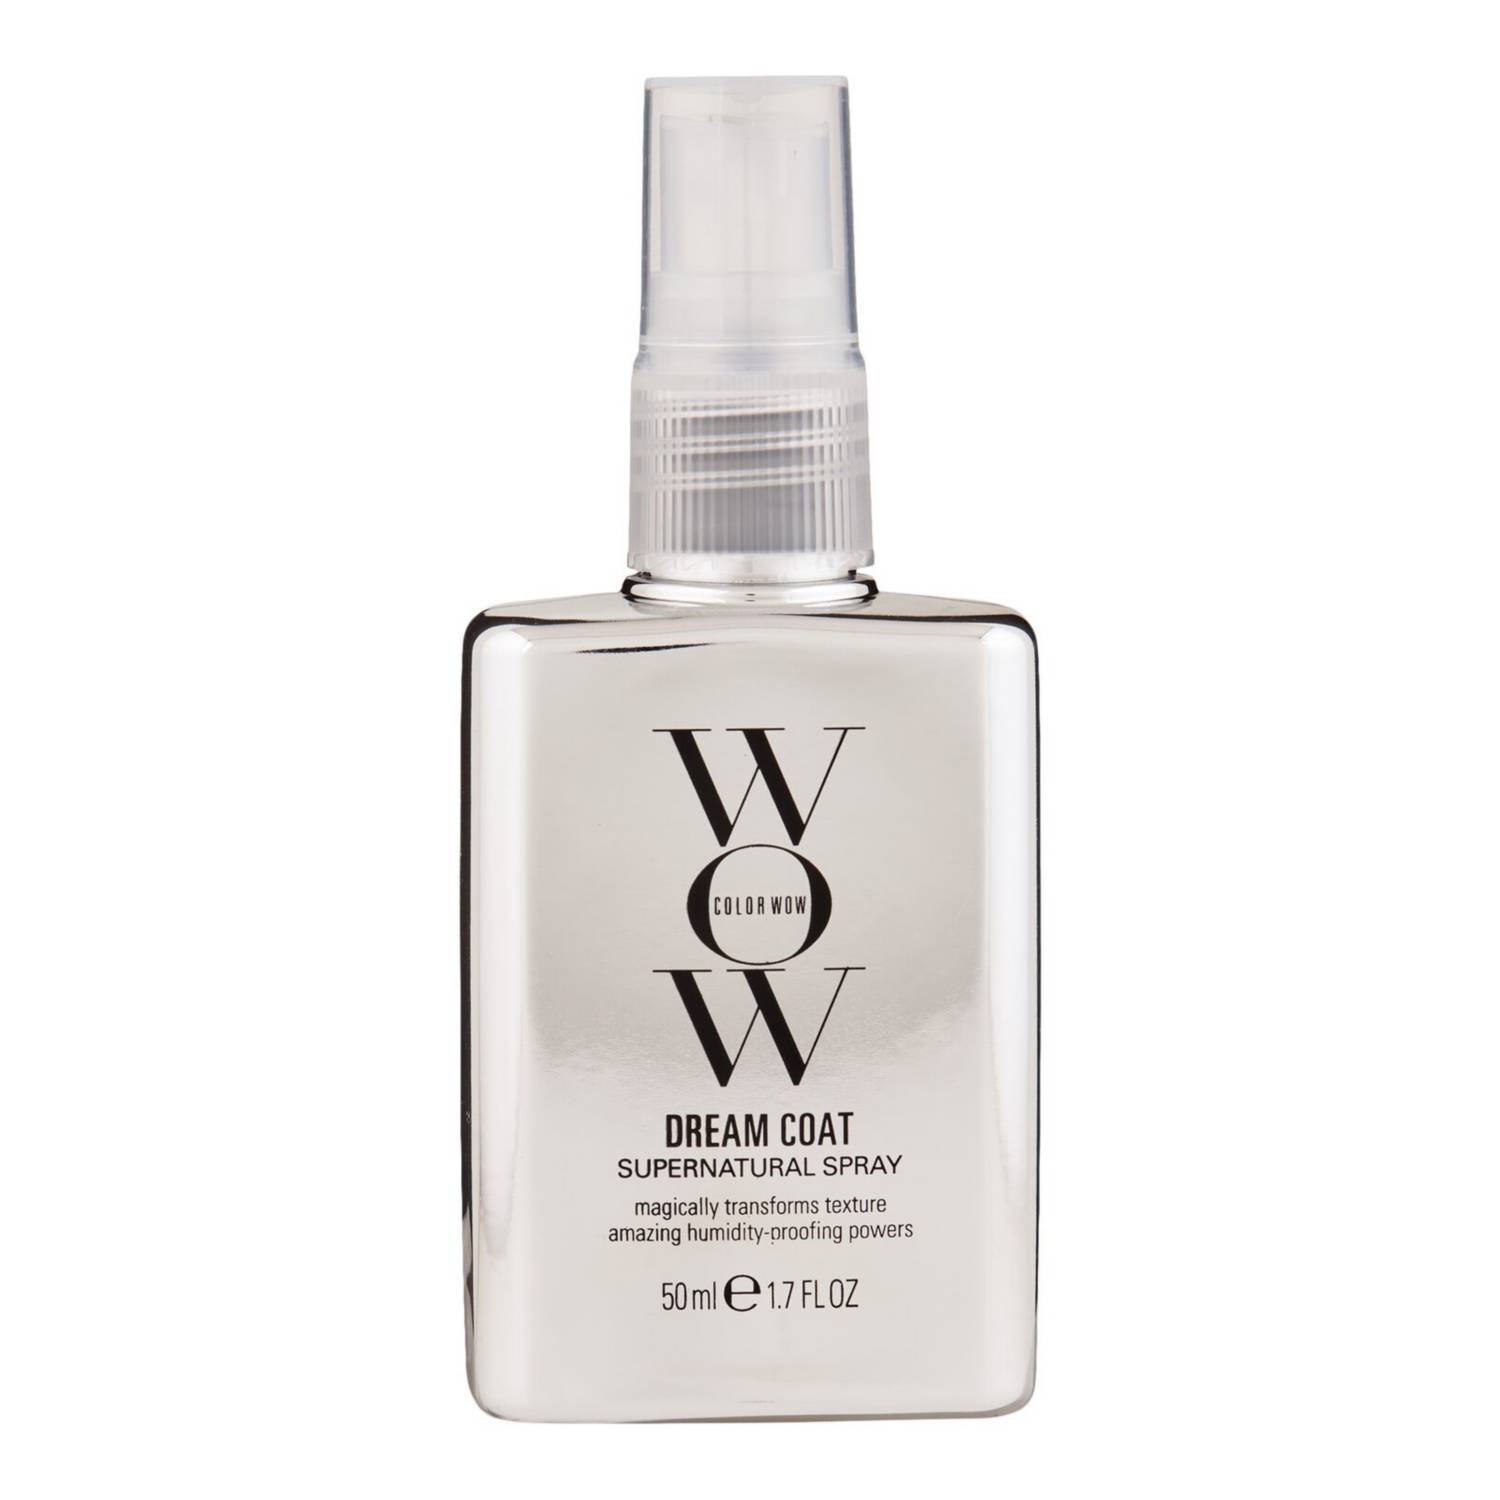 COLOR WOW Dream Coat Supernatural Spray Anti-frizz 50 ml by -COLOR